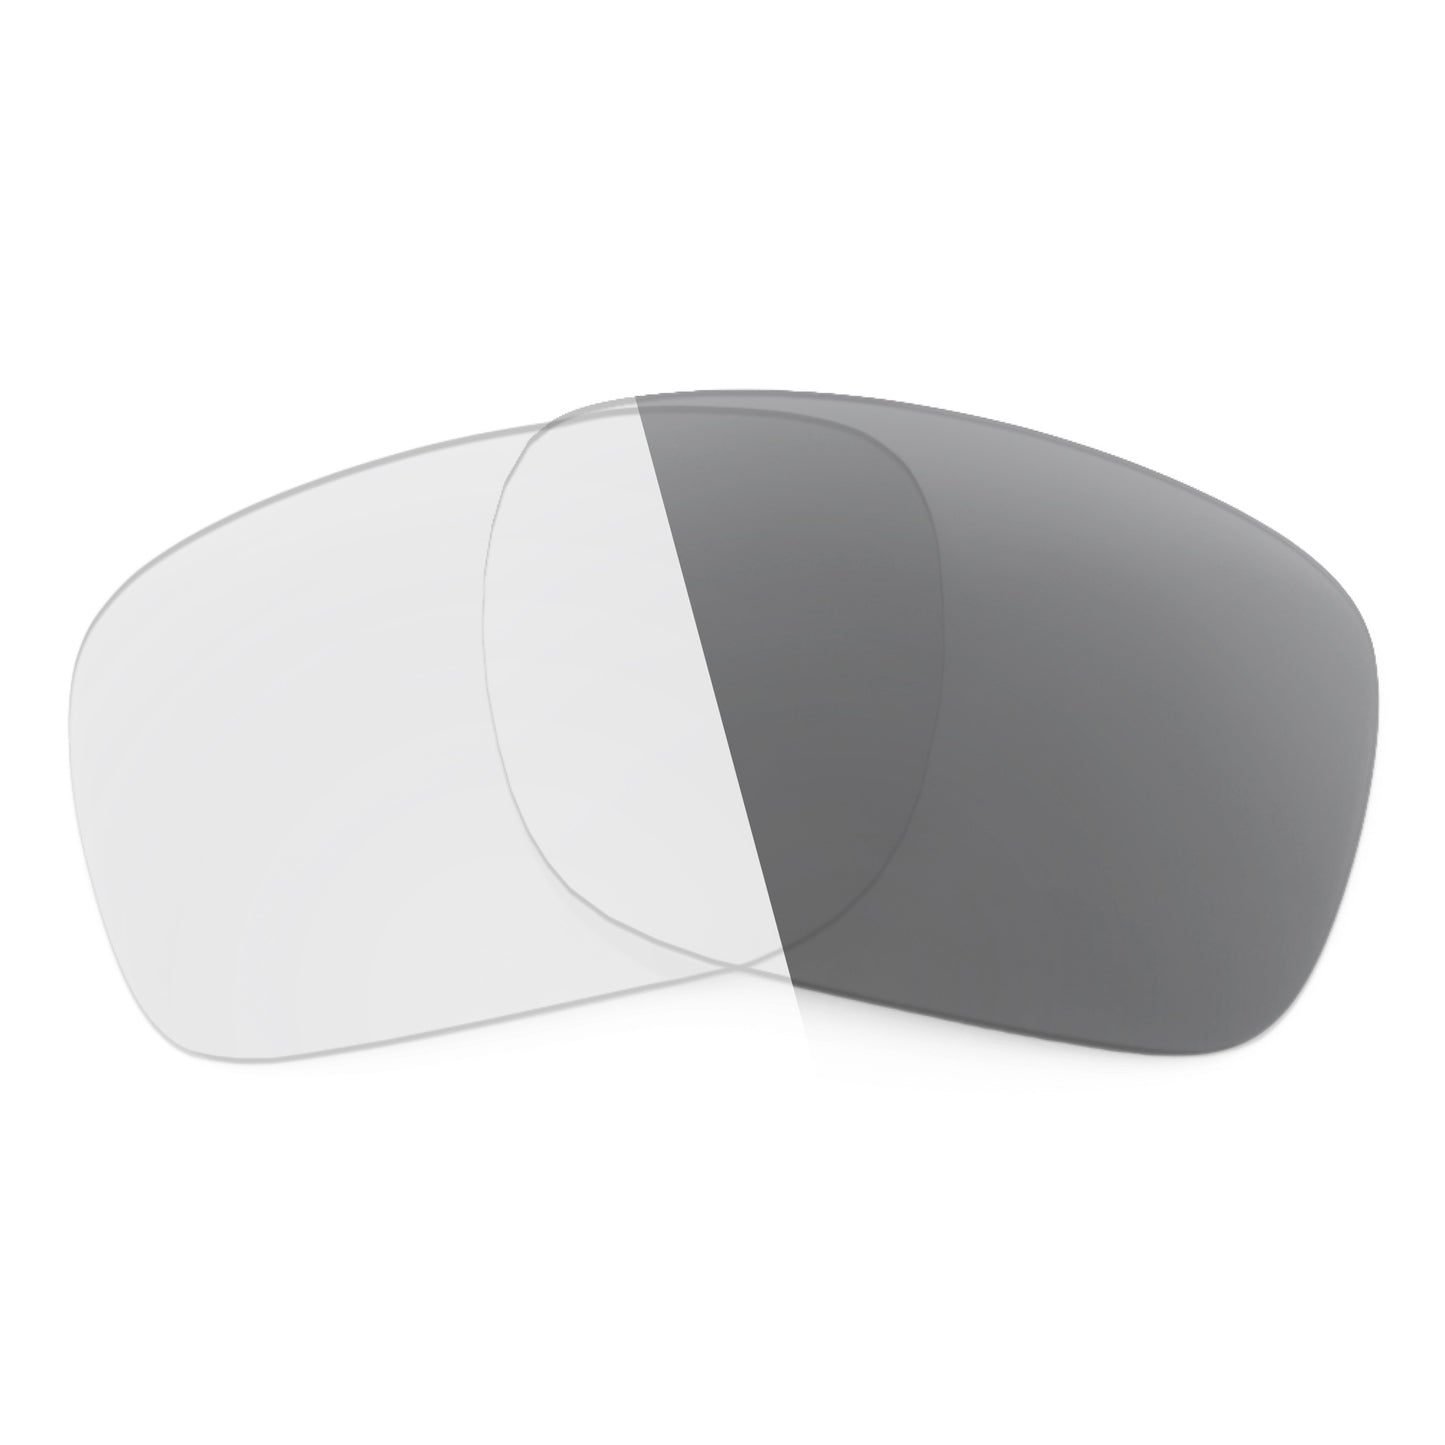 Revant replacement lenses for Ray-Ban RB3569 59mm Non-Polarized Adapt Gray Photochromic